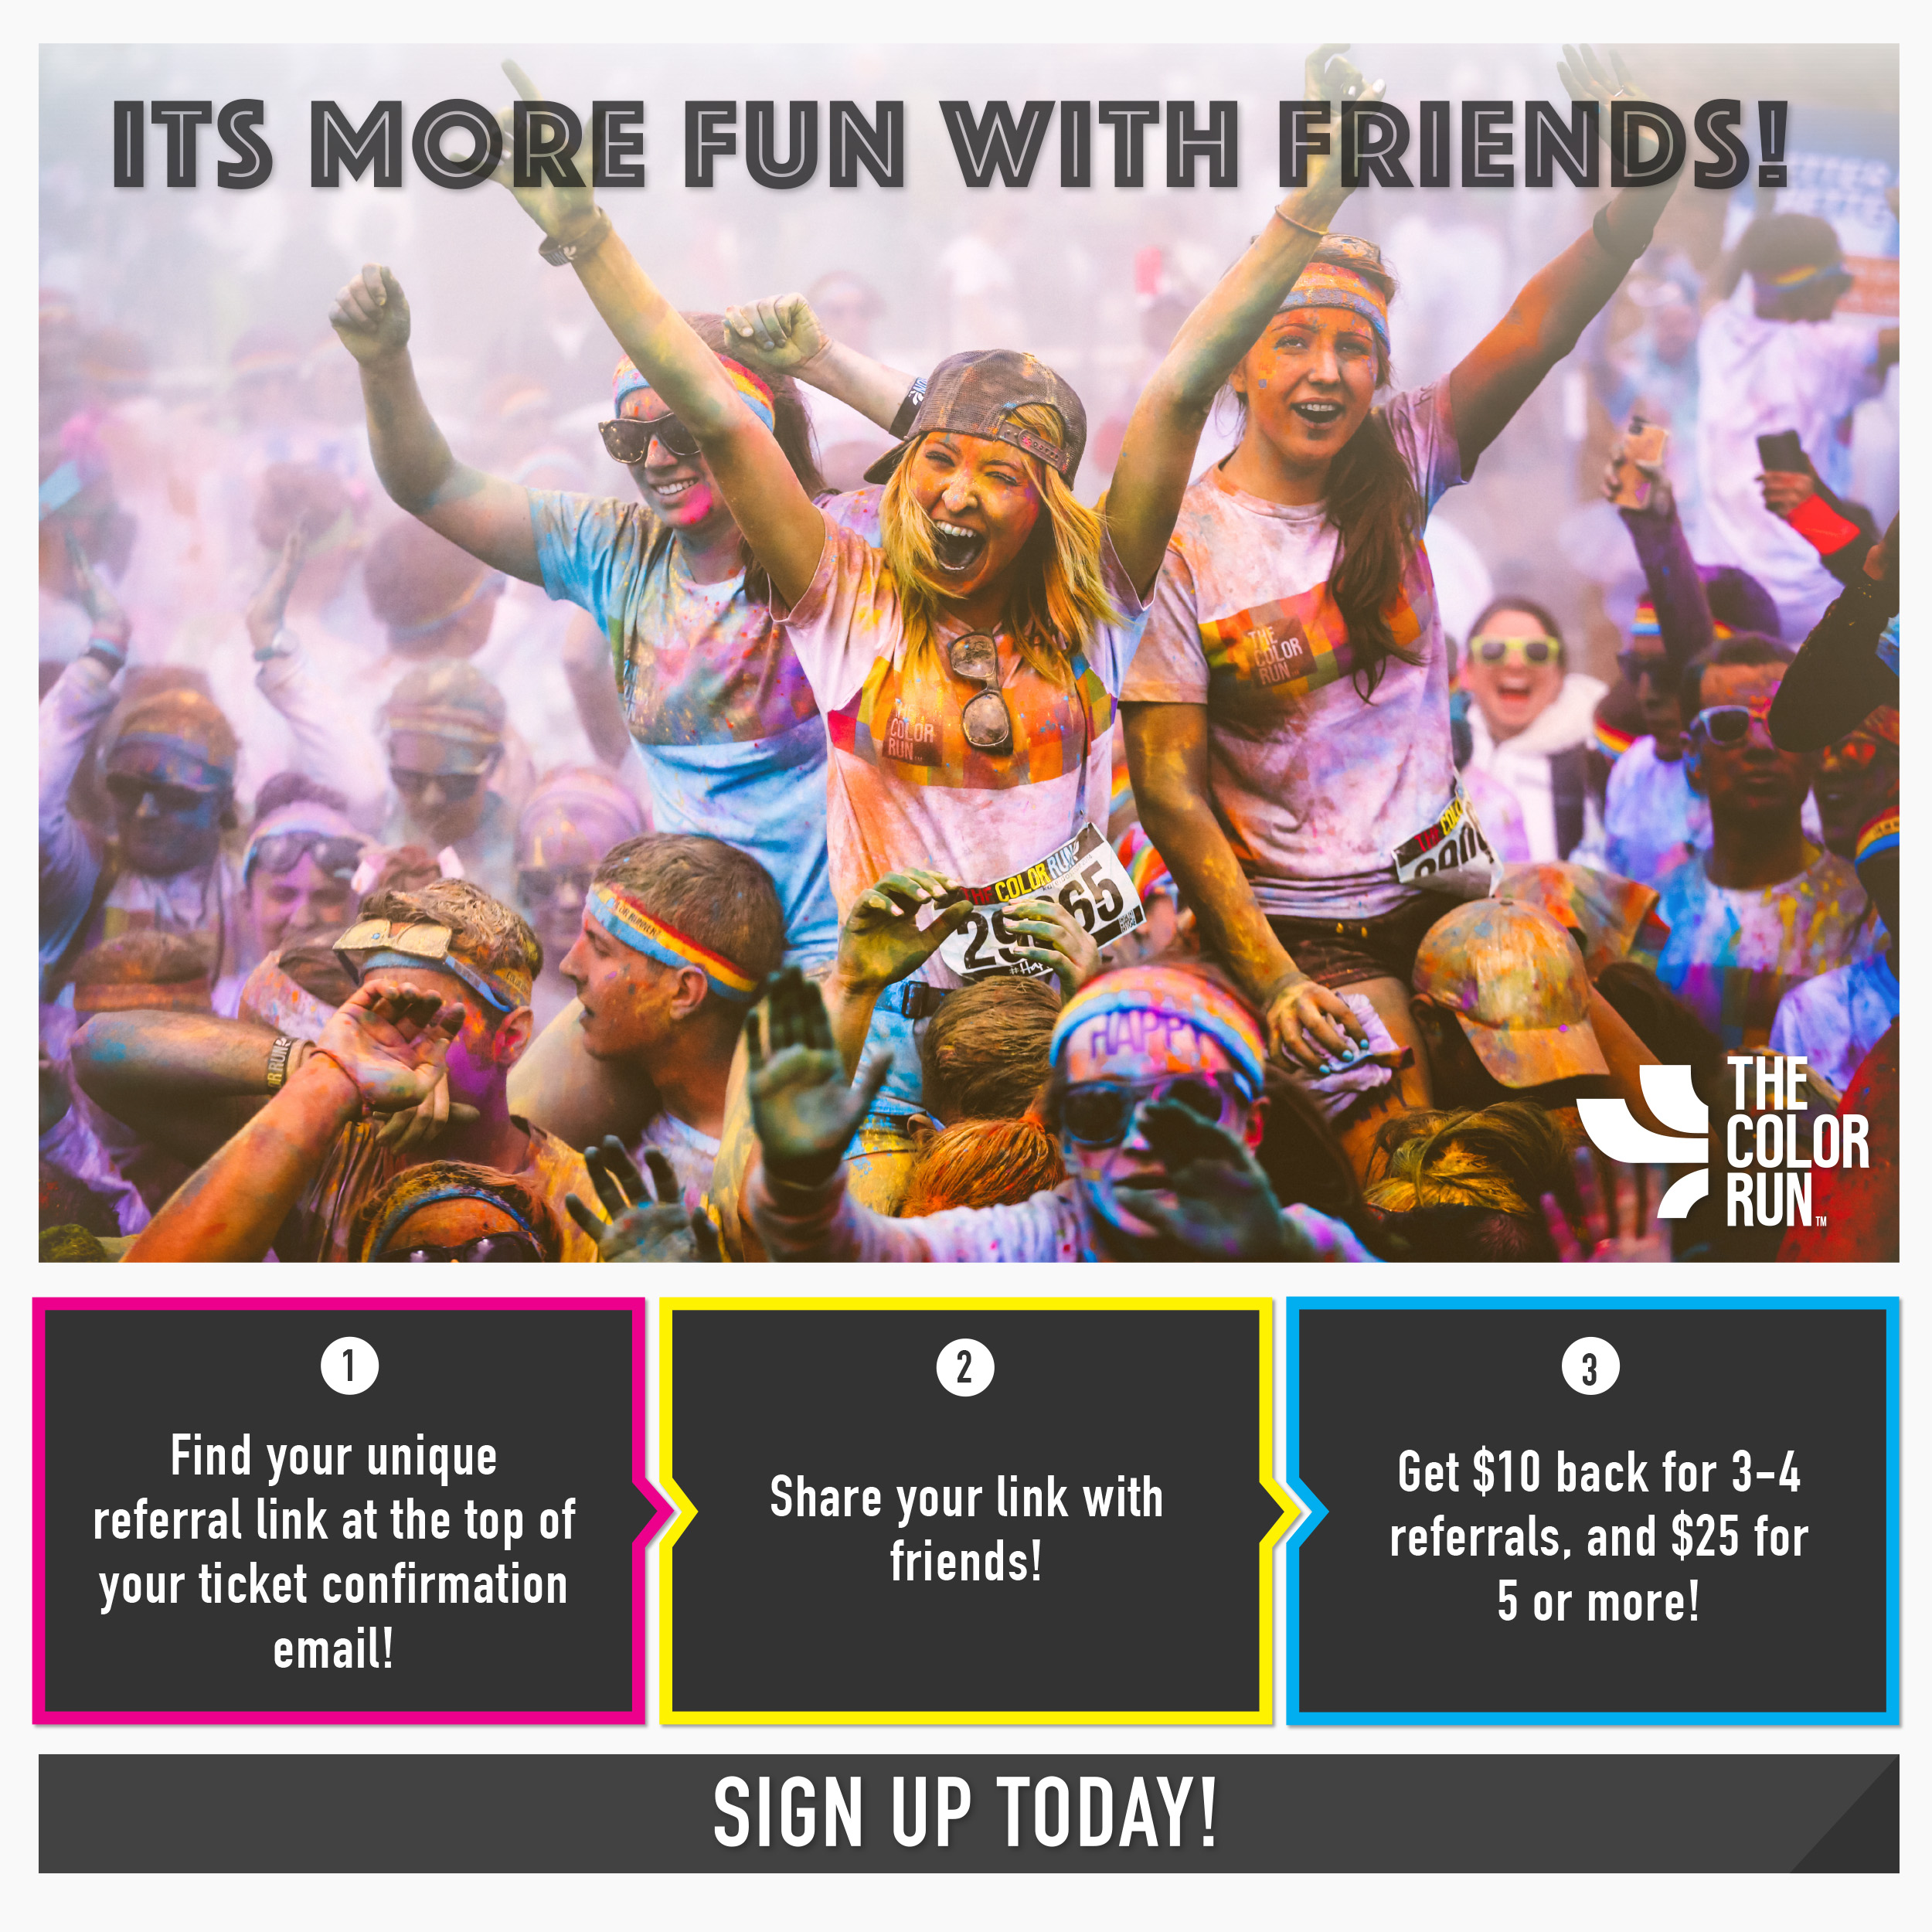 TheColorRun_EmailAd .jpg